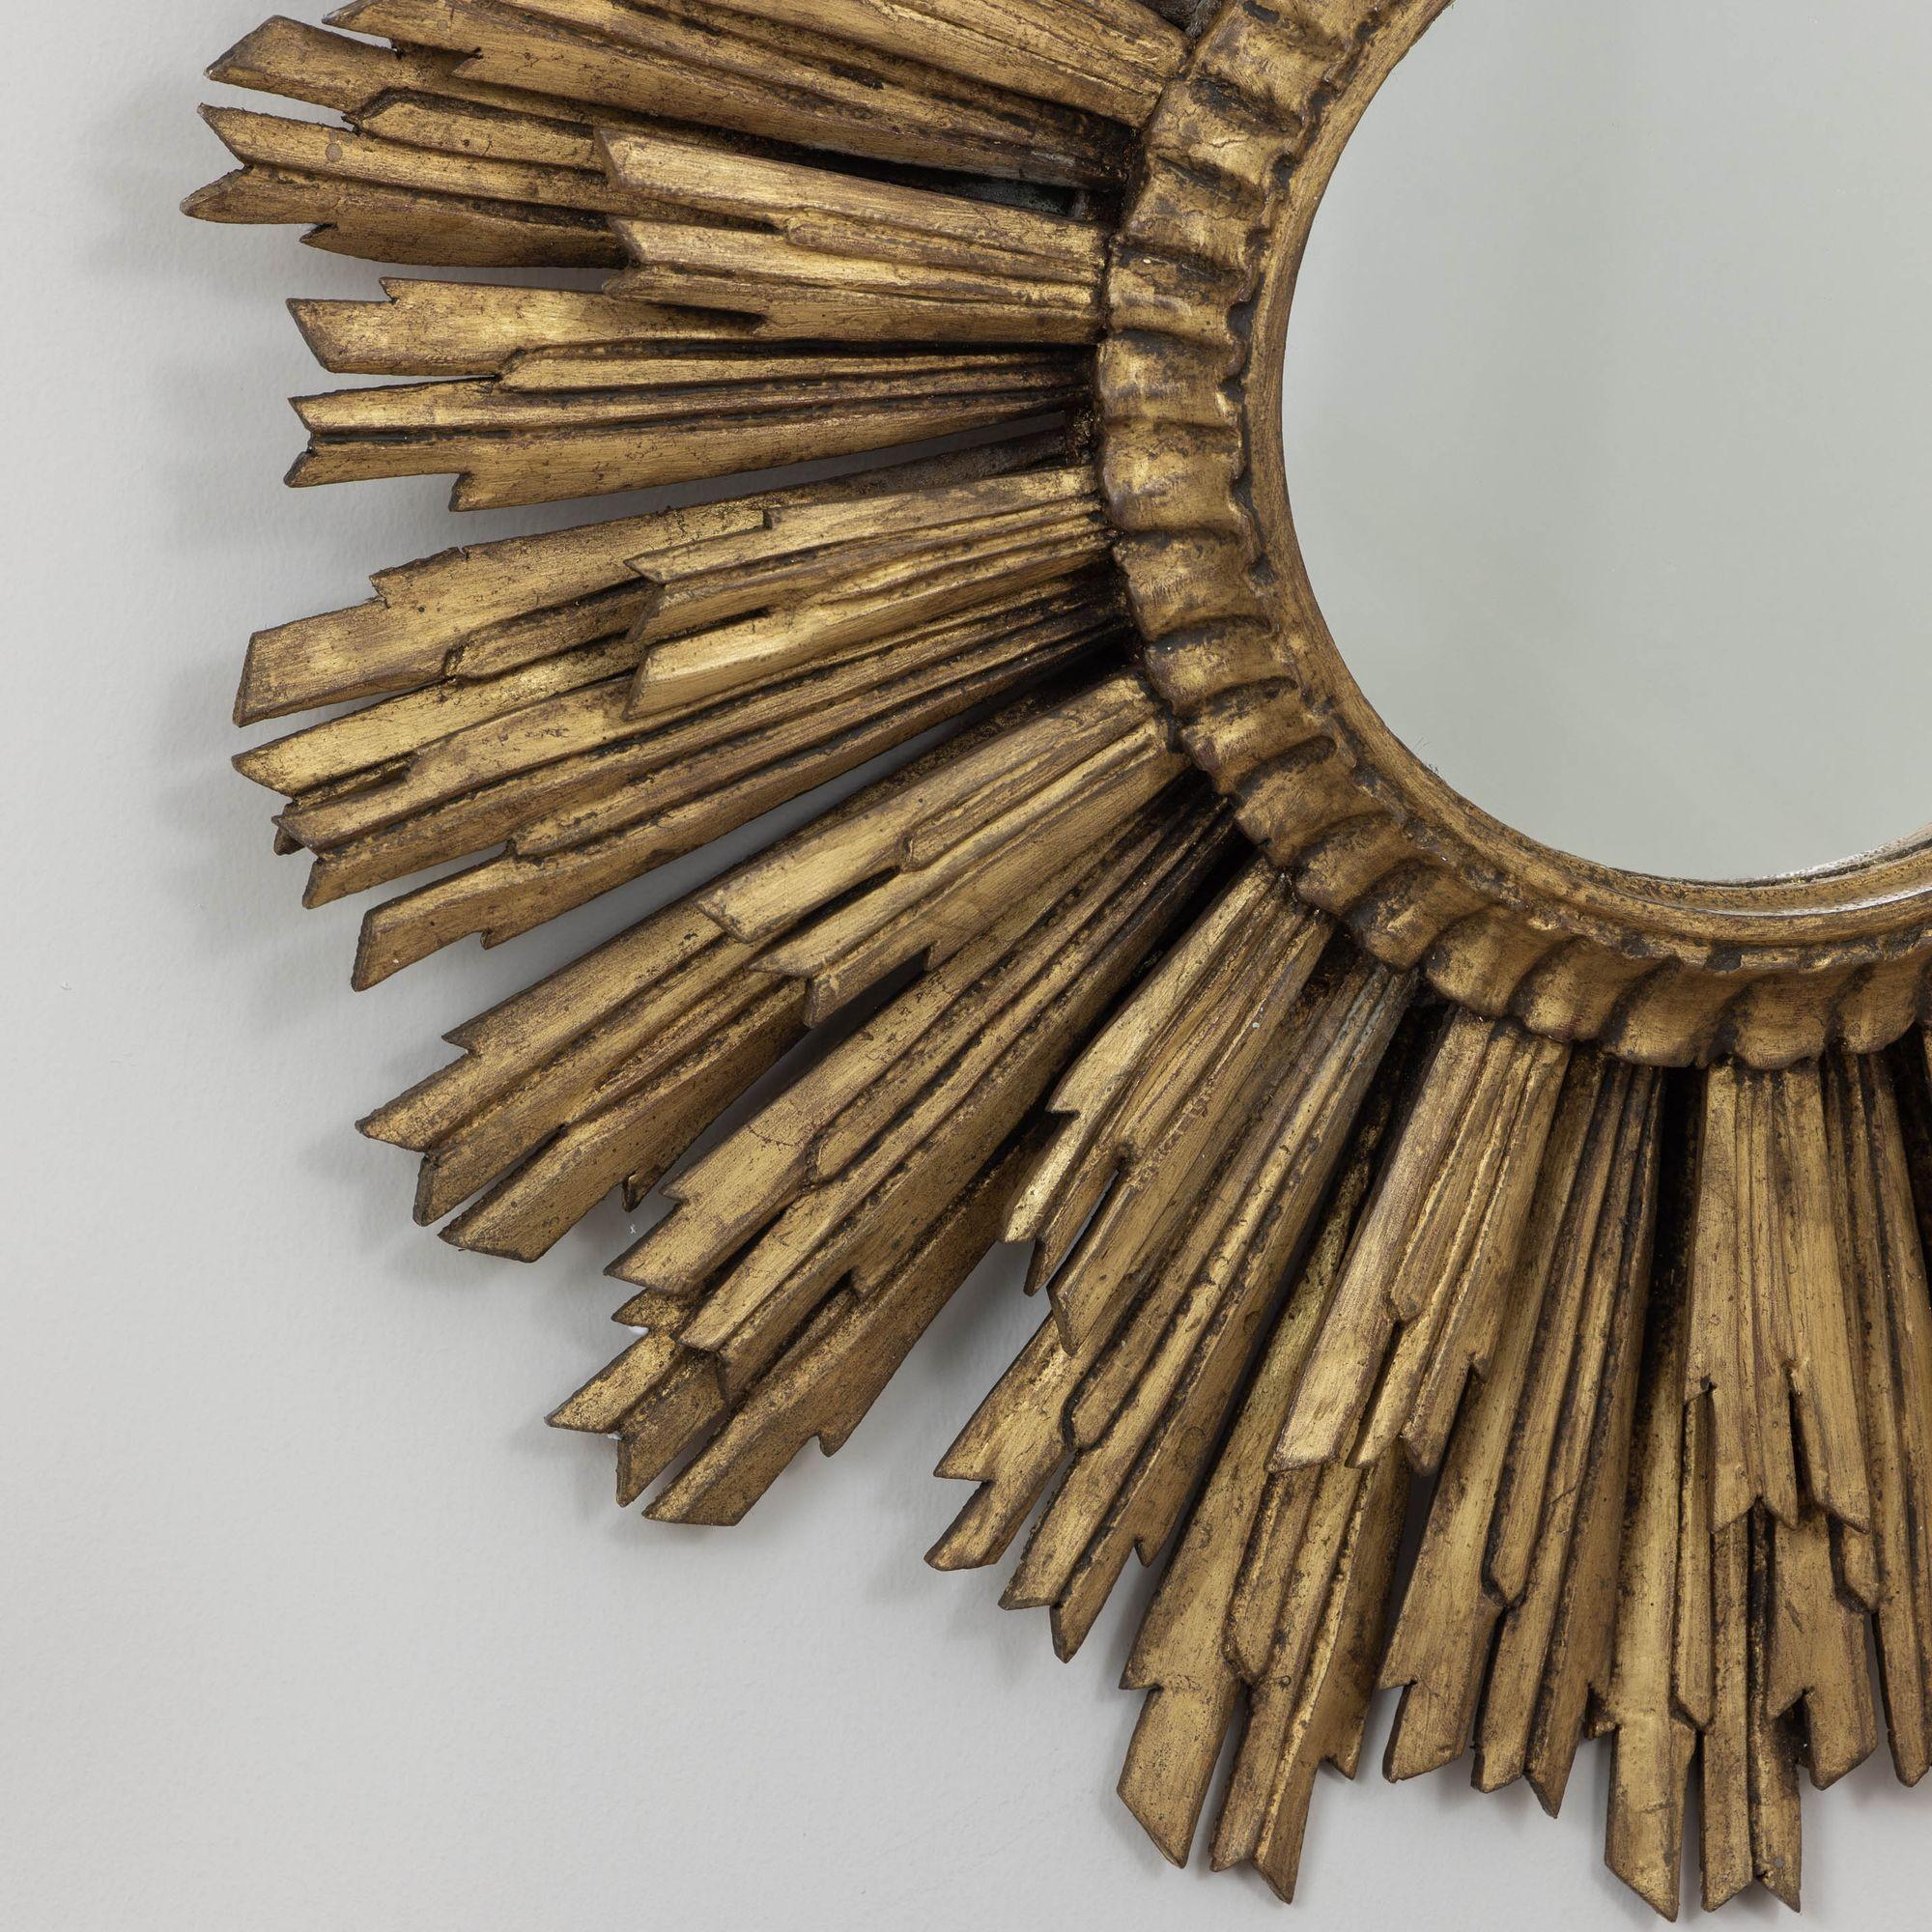 20th Century Large Early -Mid 20th c. French Art Deco Giltwood Sunburst Mirror For Sale